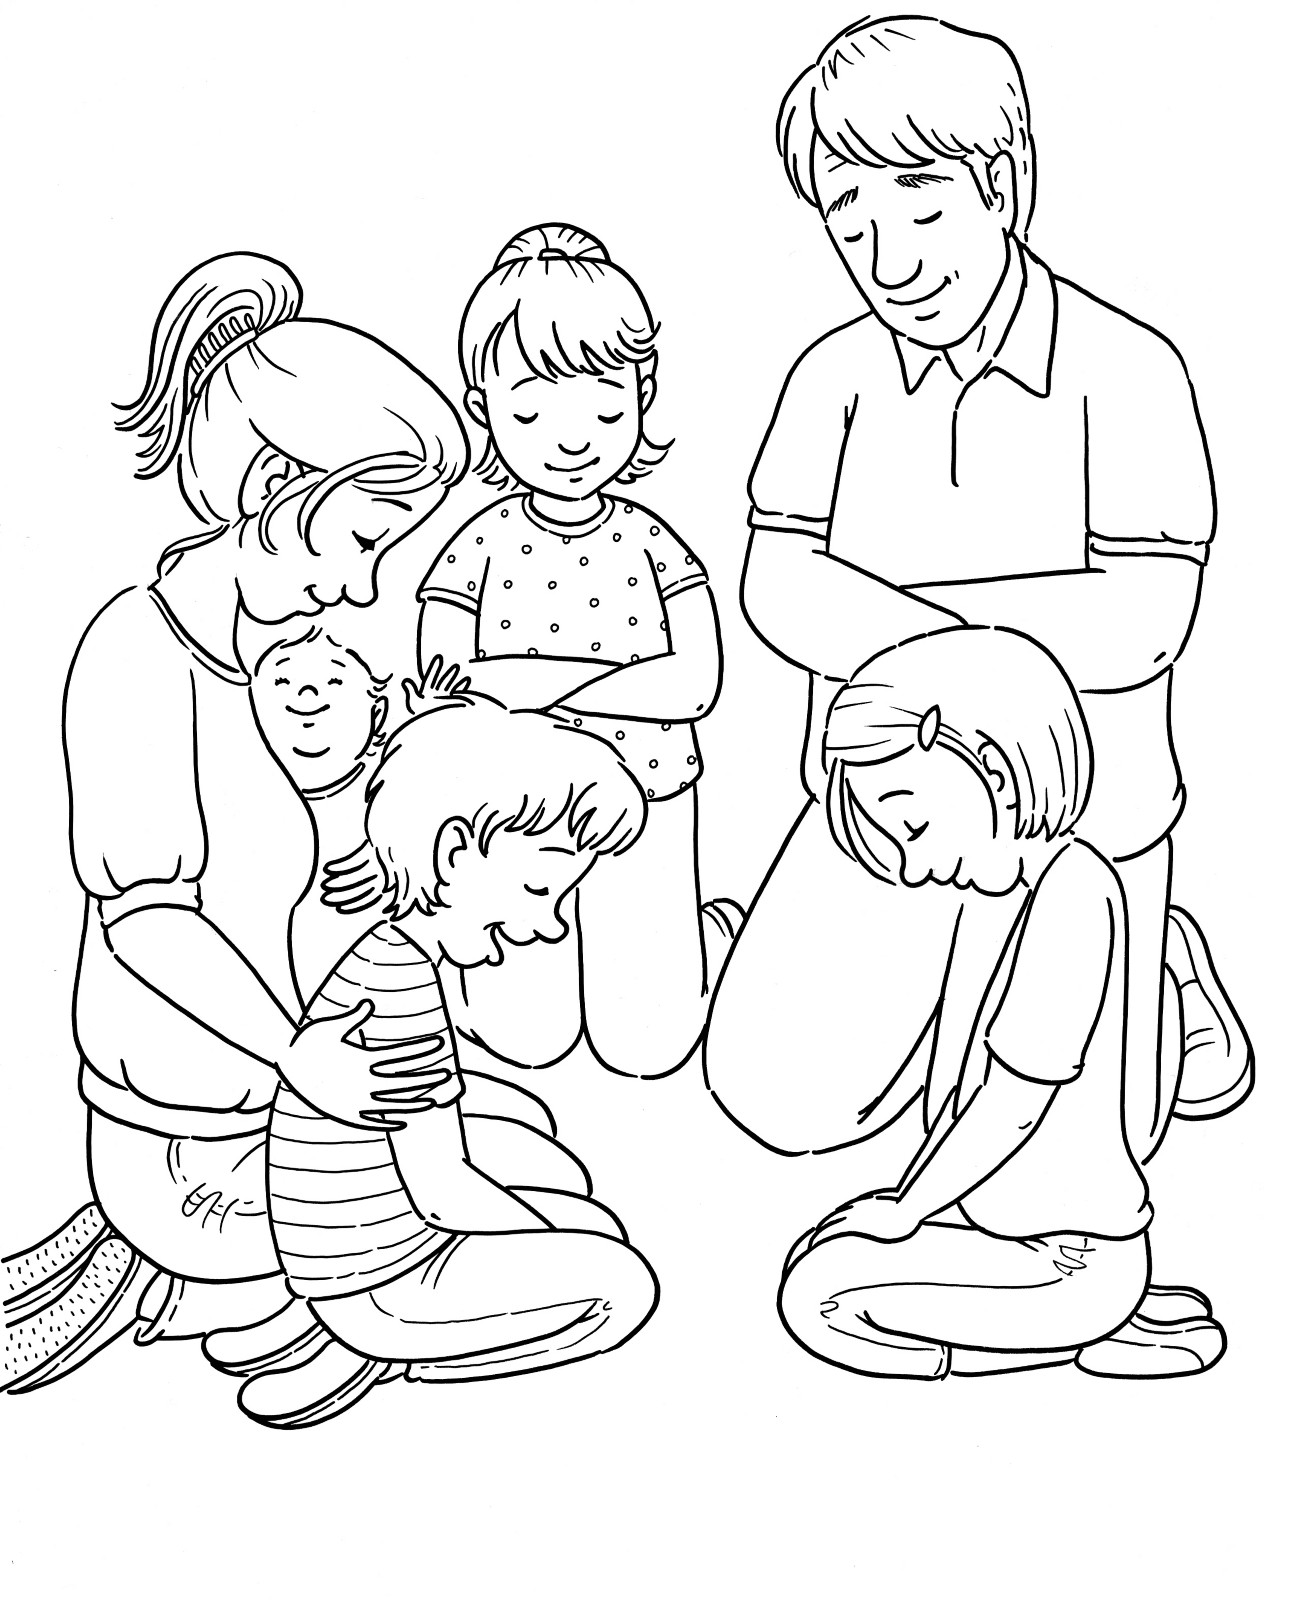 Prayer Coloring Pages For Kids
 Family Prayer